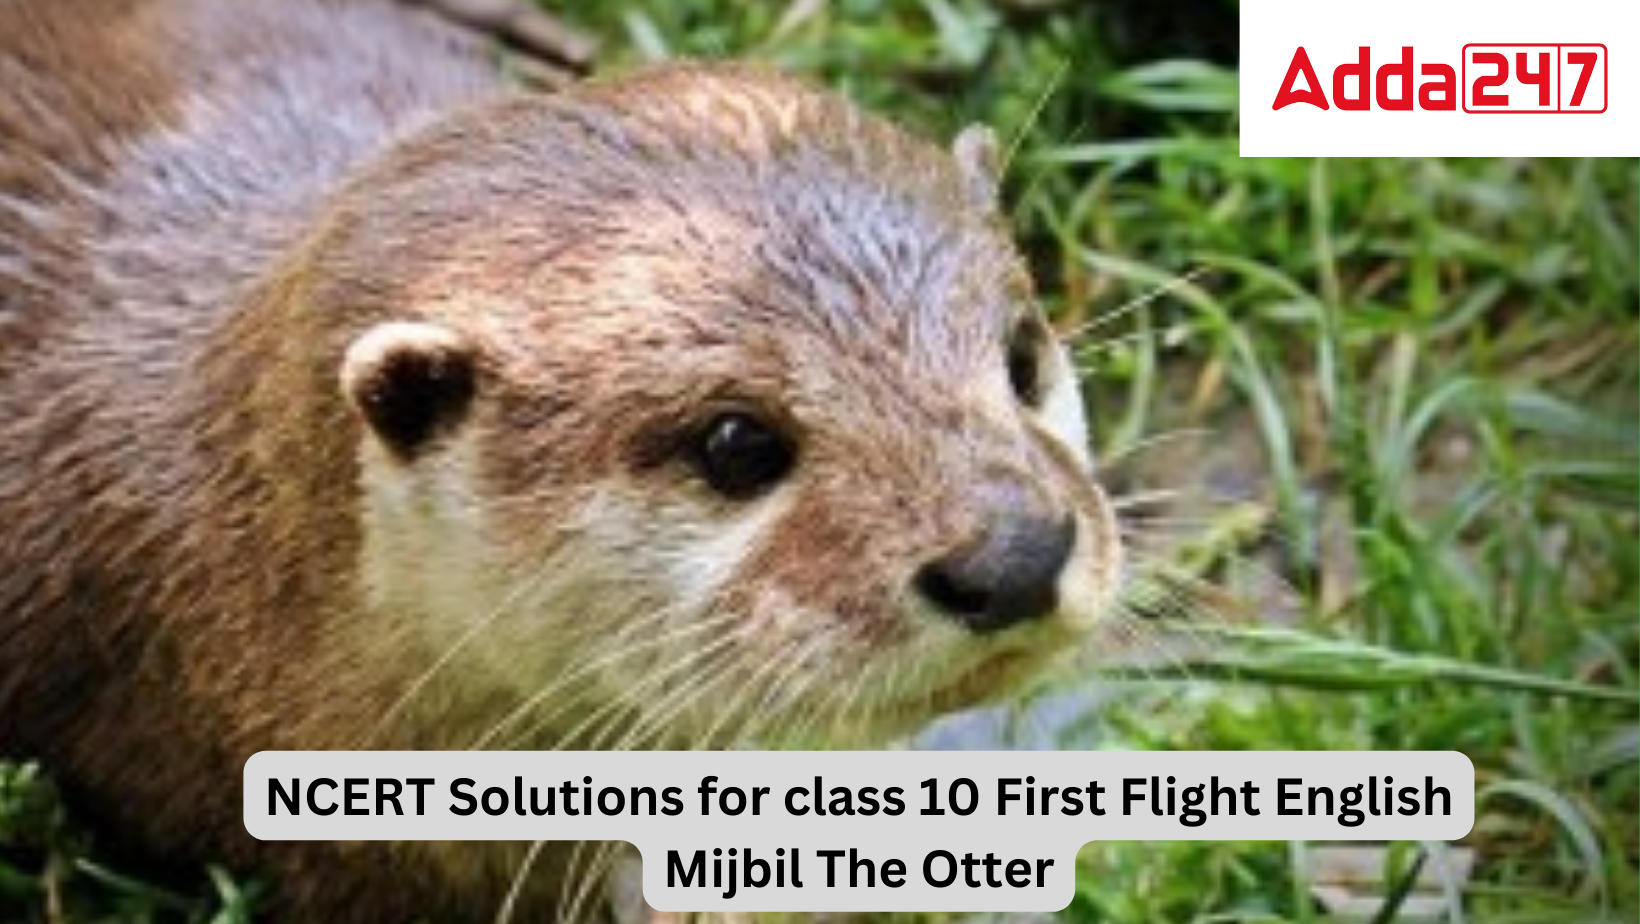 NCERT Solutions For Class 10 English First Flight Chapter 8 Mijbil the Otter